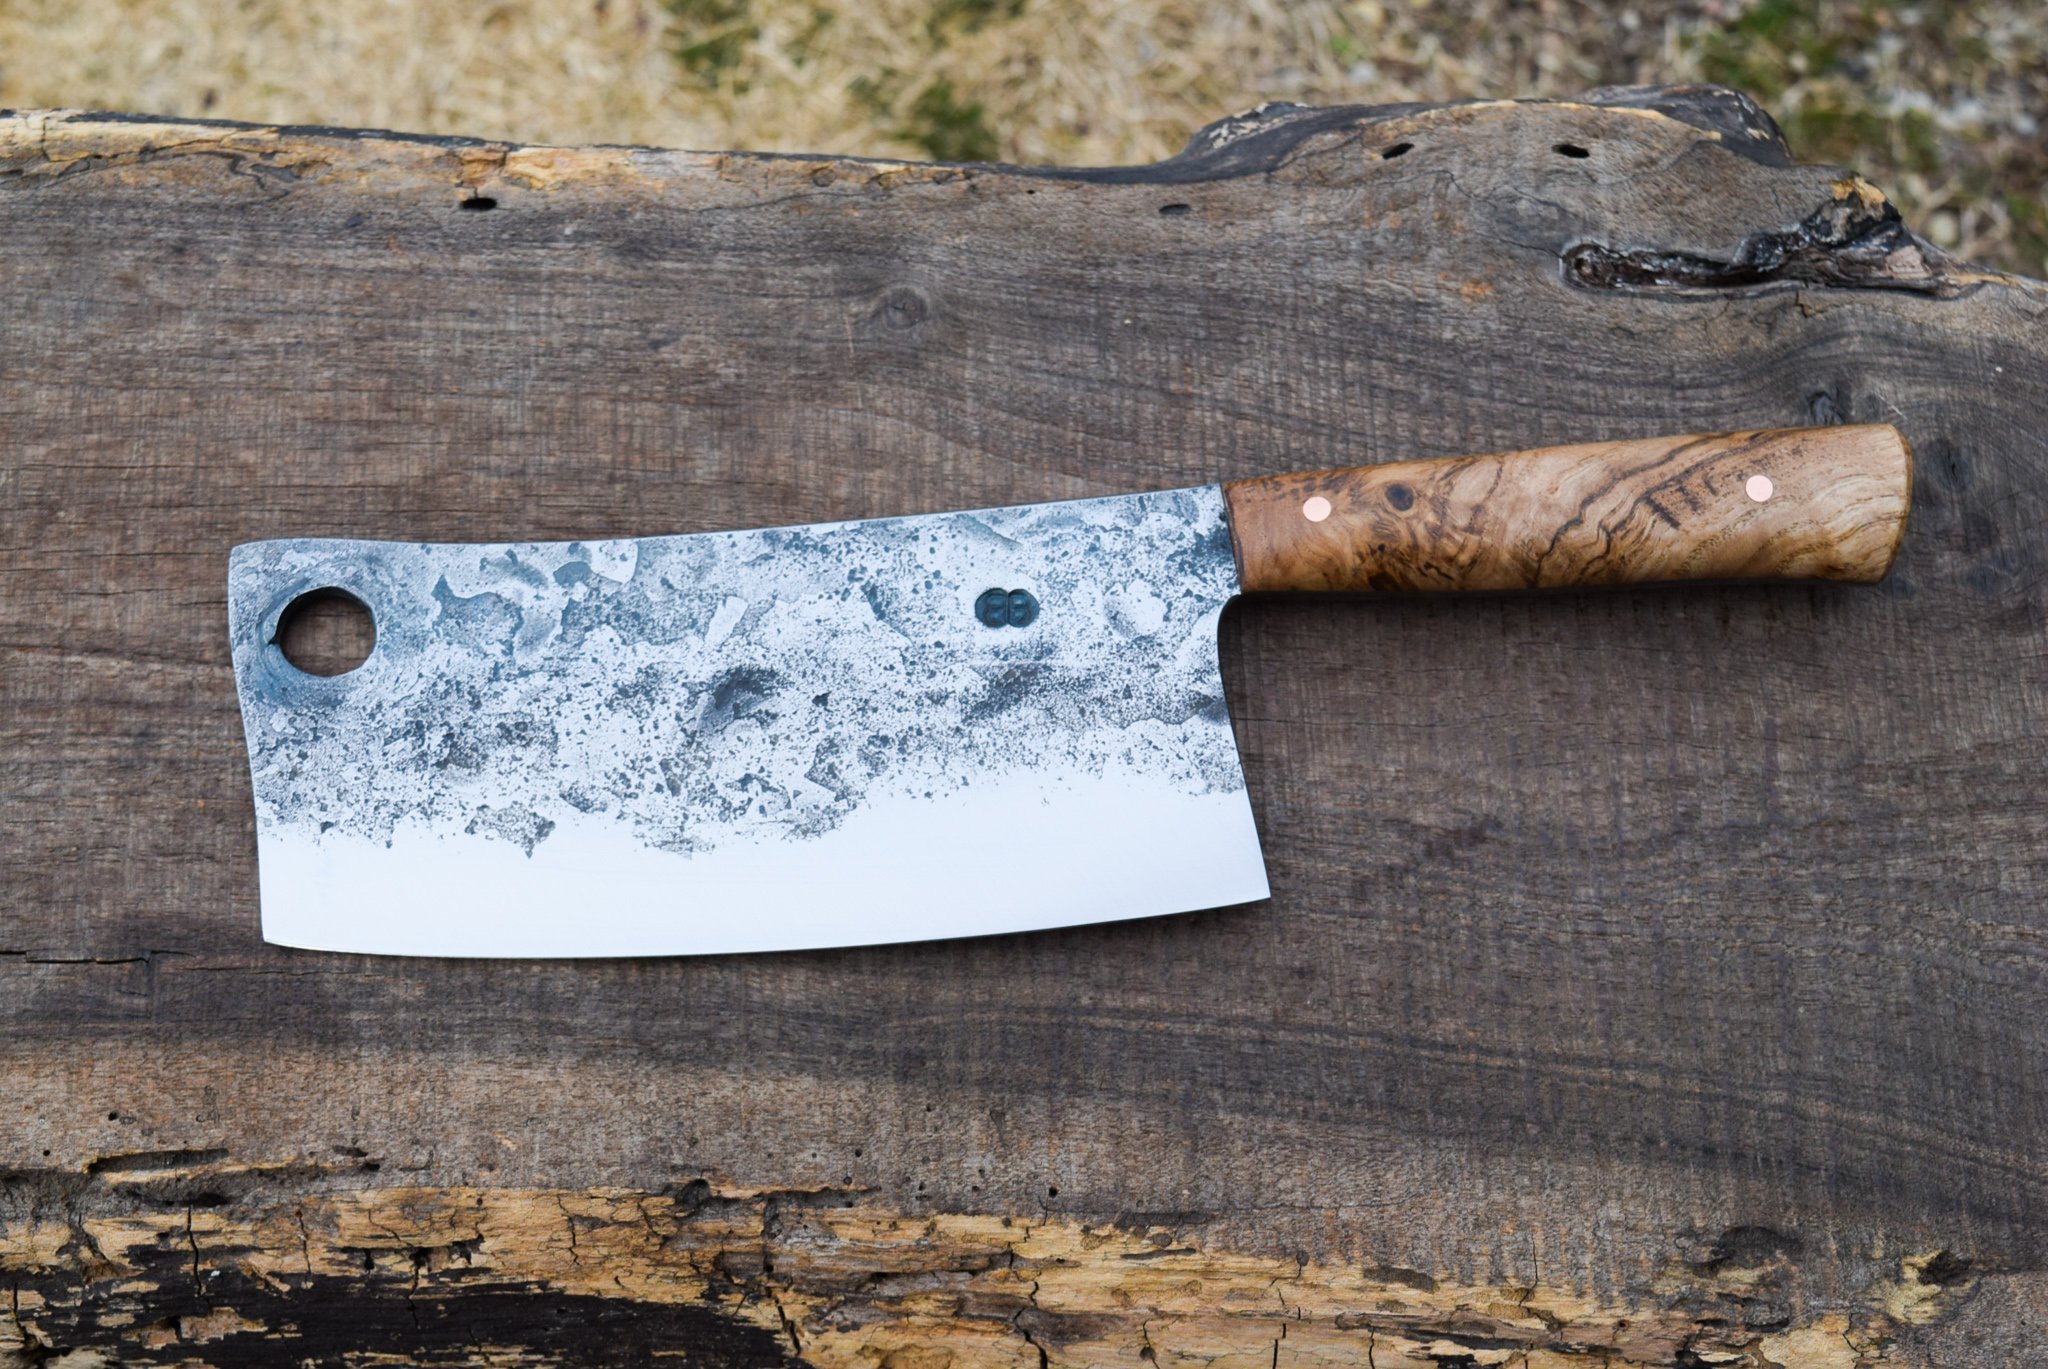  7" Full-Tang Cleaver.  Western Chestnut Burl Handle with Copper Pins. 